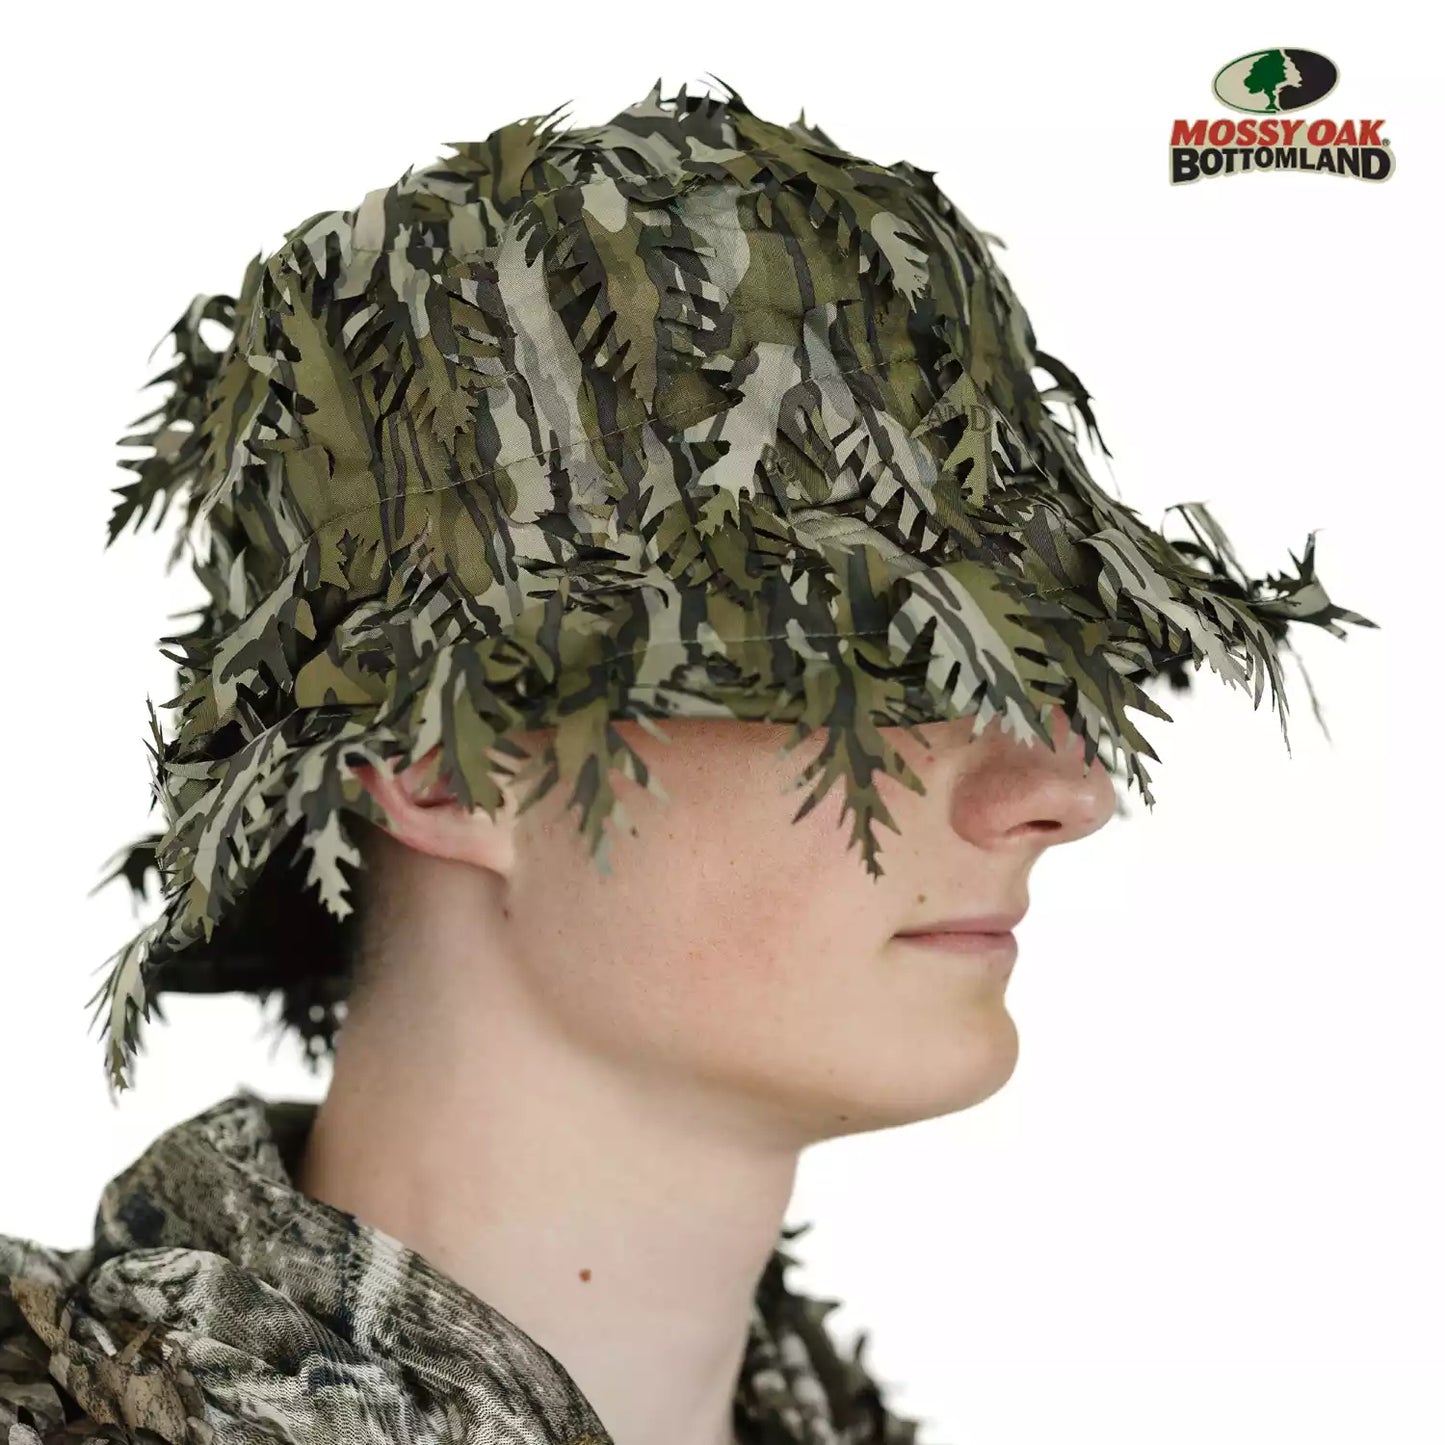 2-in-1 Leafy Face Mask and Bucket Hat (Adjustable, OSFM)